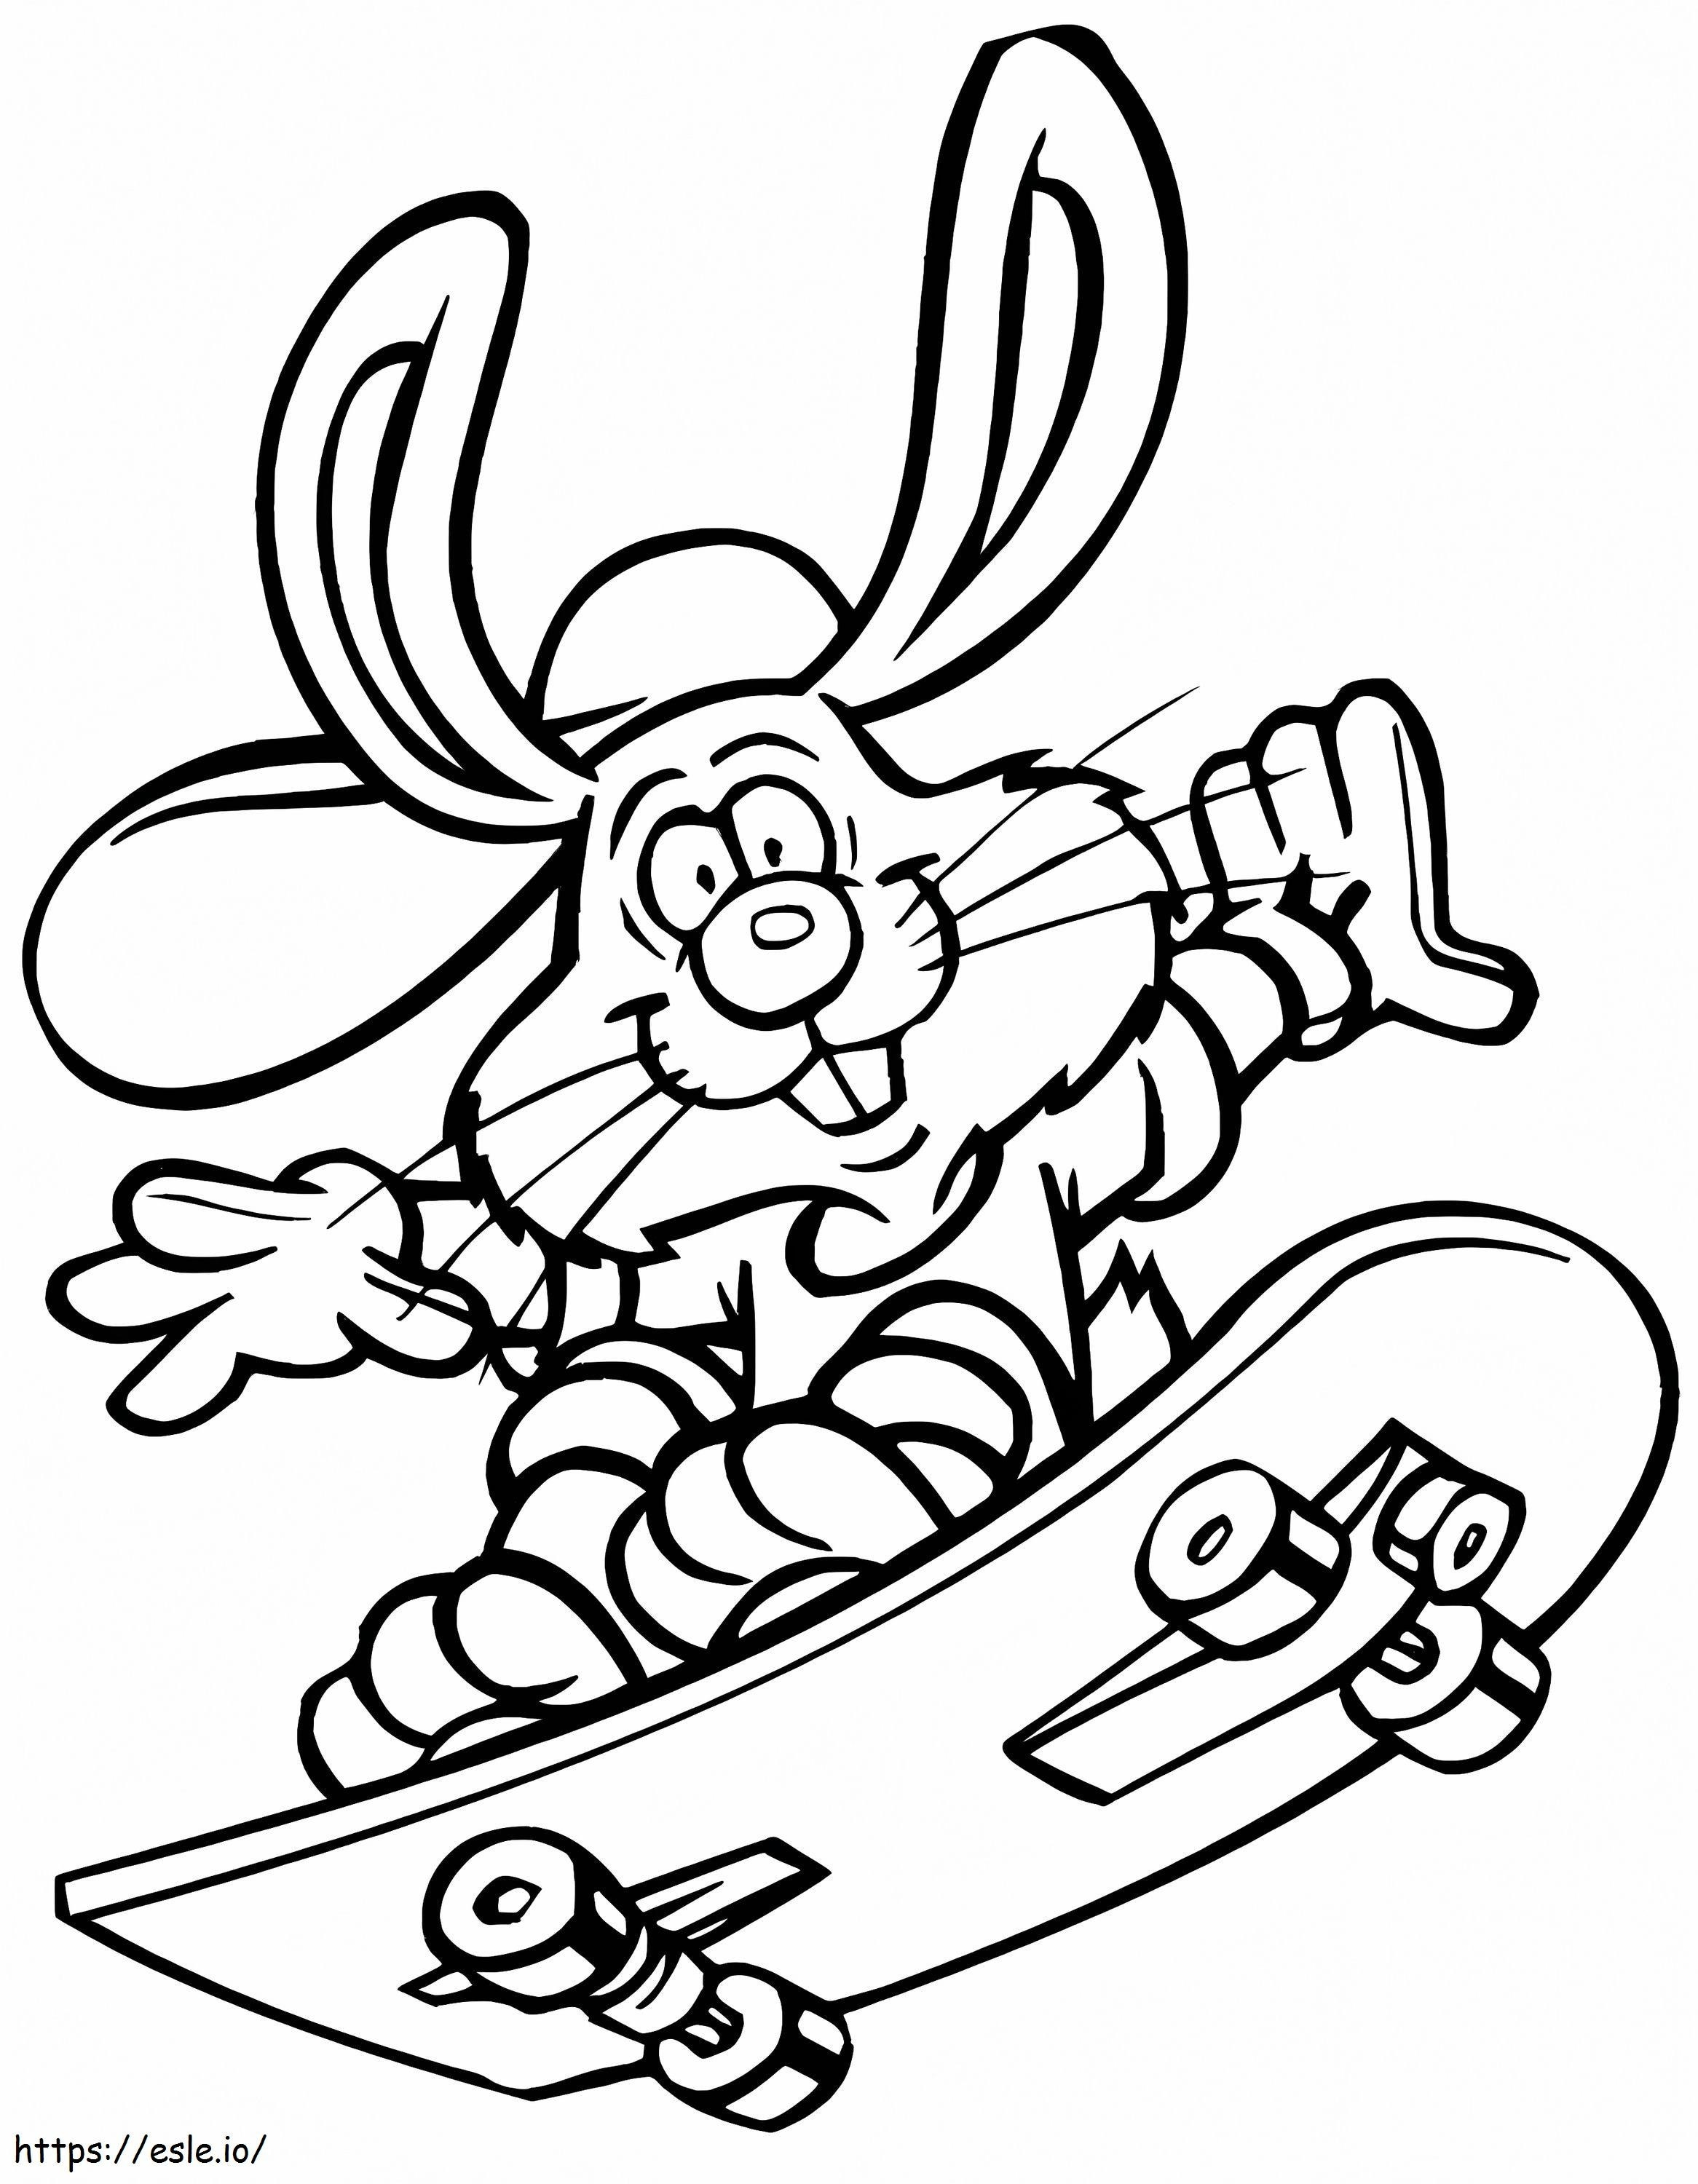 Rabbit On Skateboard coloring page